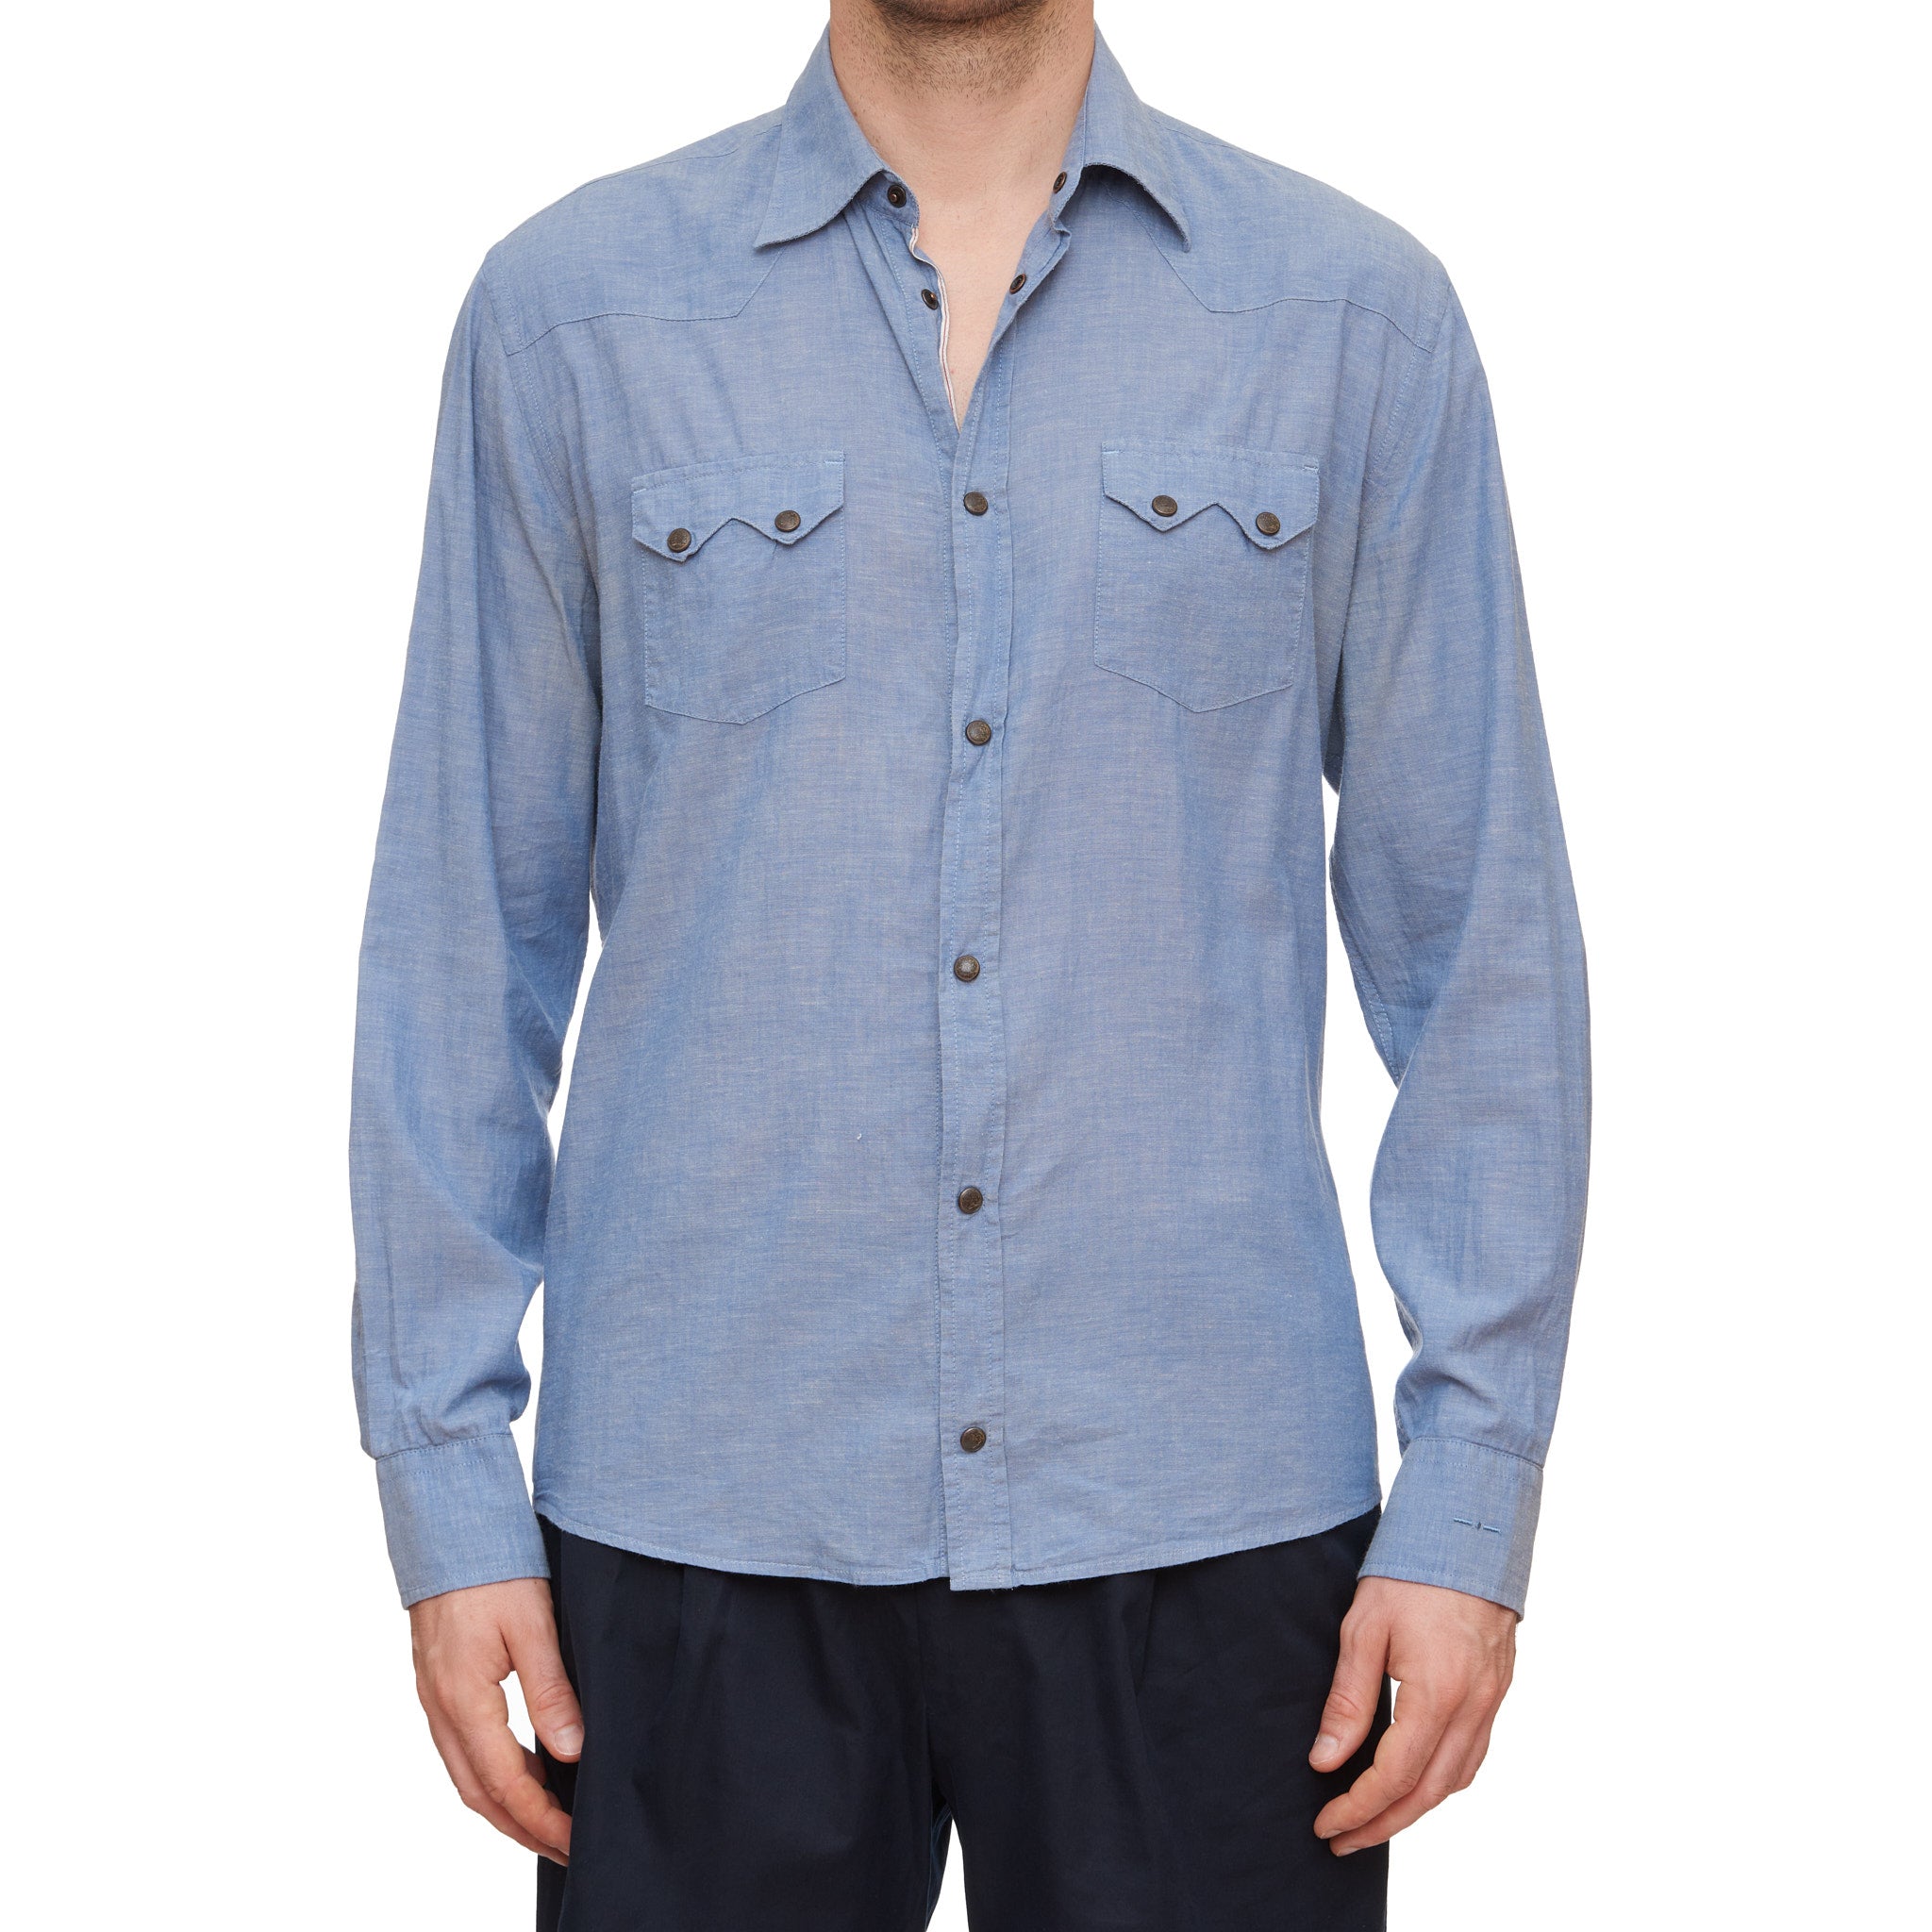 Lapo Elkann's ITALIA INDEPENDENT Chambray Selvedge Western Casual Shirt Size XL Slim Fit ITALIA INDEPENDENT